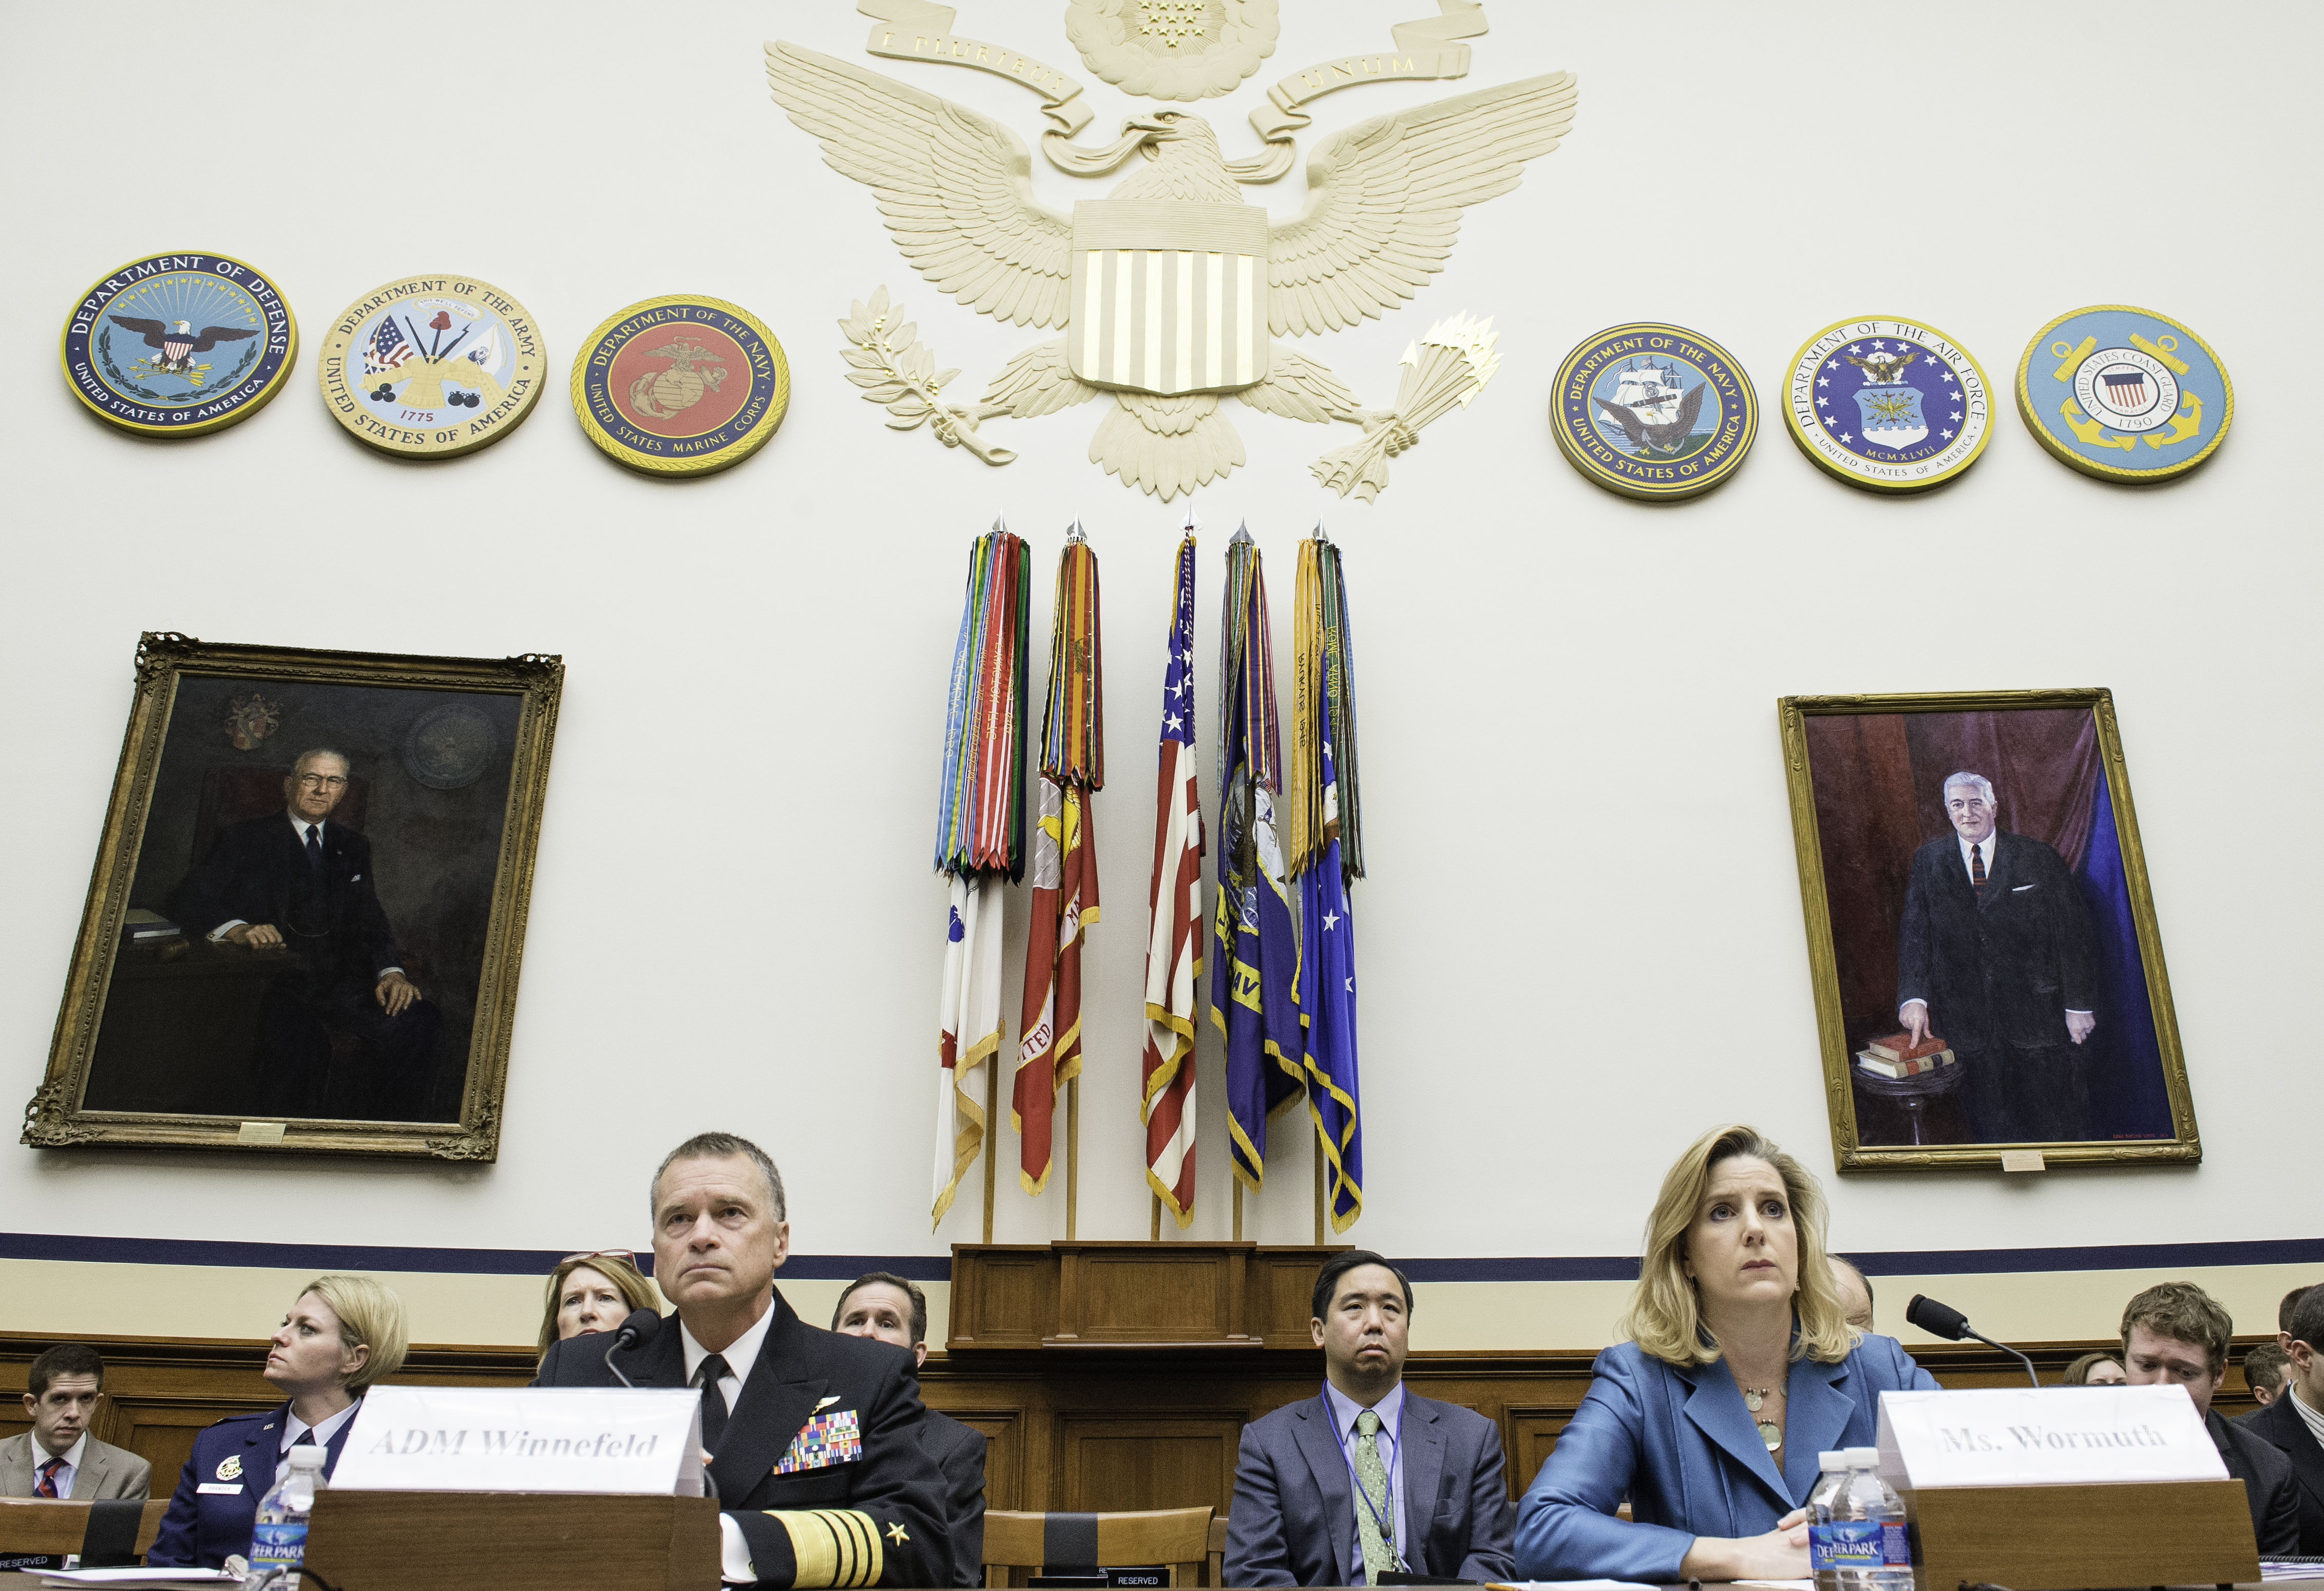 Navy Adm. James A. Winnefeld Jr., vice chairman of the Joint Chiefs of Staff, and Christine E. Wormuth, deputy undersecretary of defense for strategy, plans and force development, testify before the House Armed Services Committee on the 2014 Quadrennial Defense Review in Washington, D.C., April 3, 2014. DOD Photo